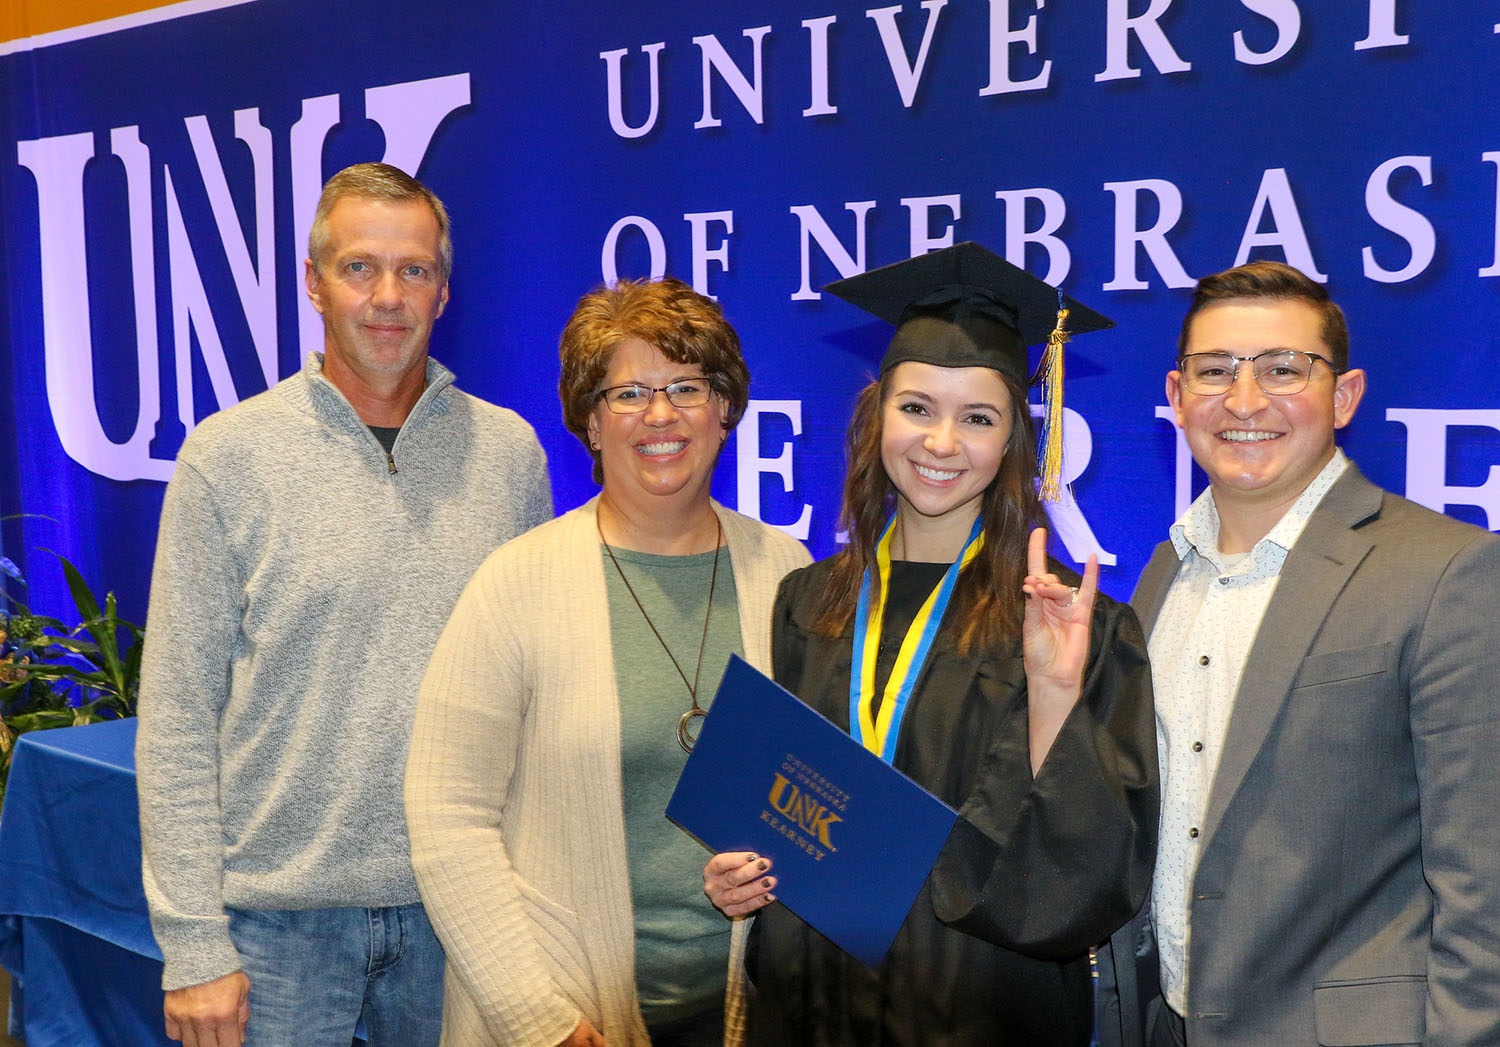 UNK graduate Kaitlyn Becher of Leigh poses for a photo with her parents Bill and Jill and fiancé Jon Venzor following Friday’s commencement ceremony. “It’s really exciting to see her take the next step in her life,” Jill Becher said of her daughter. (Photos by Todd Gottula, UNK Communications)